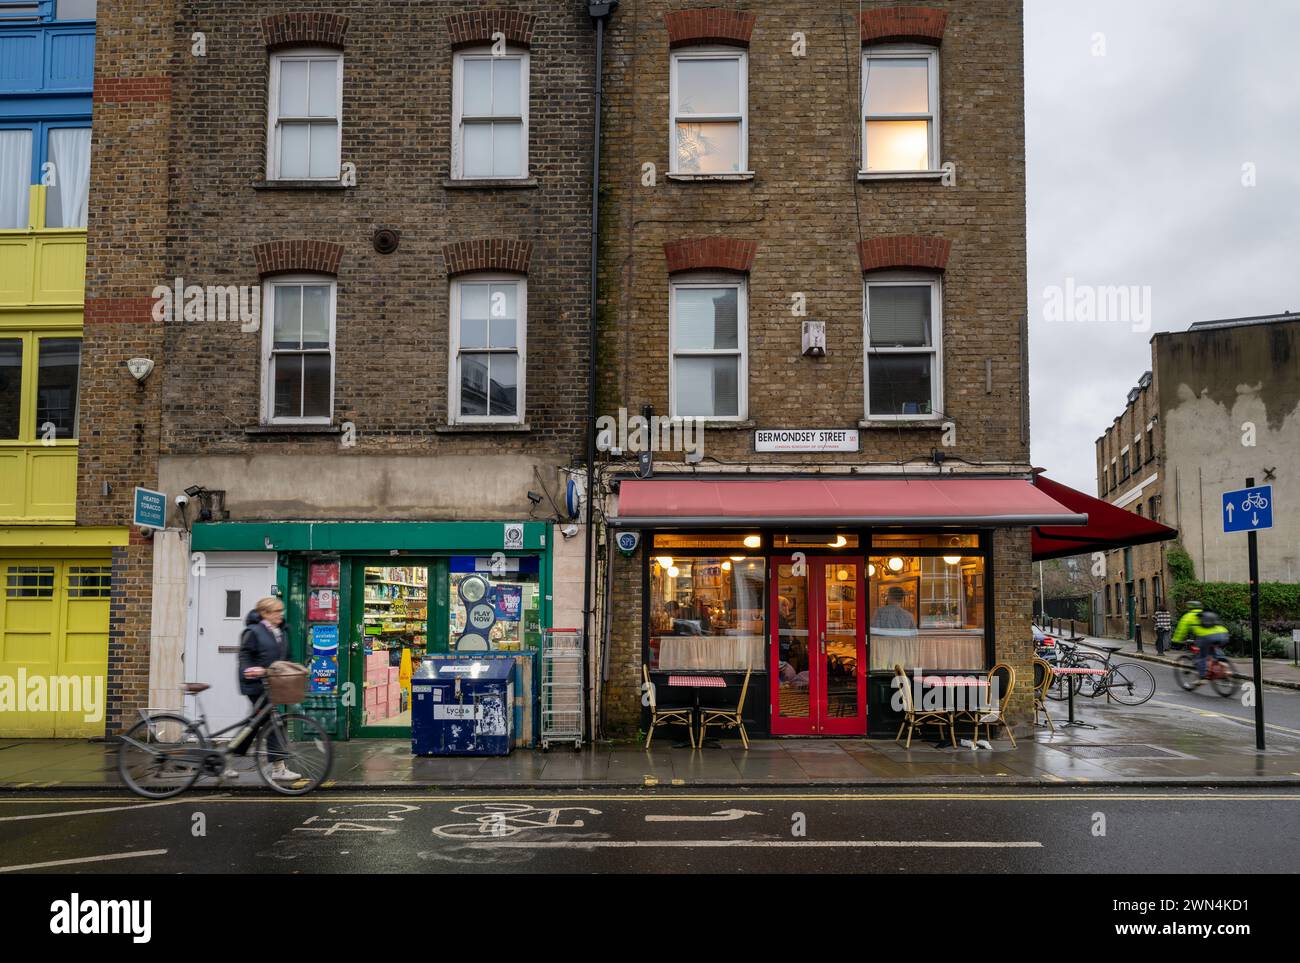 Bermondsey, London, UK: Small shop and restaurants on Bermondsey Street in the London borough of Southwark with two cyclists. Stock Photo